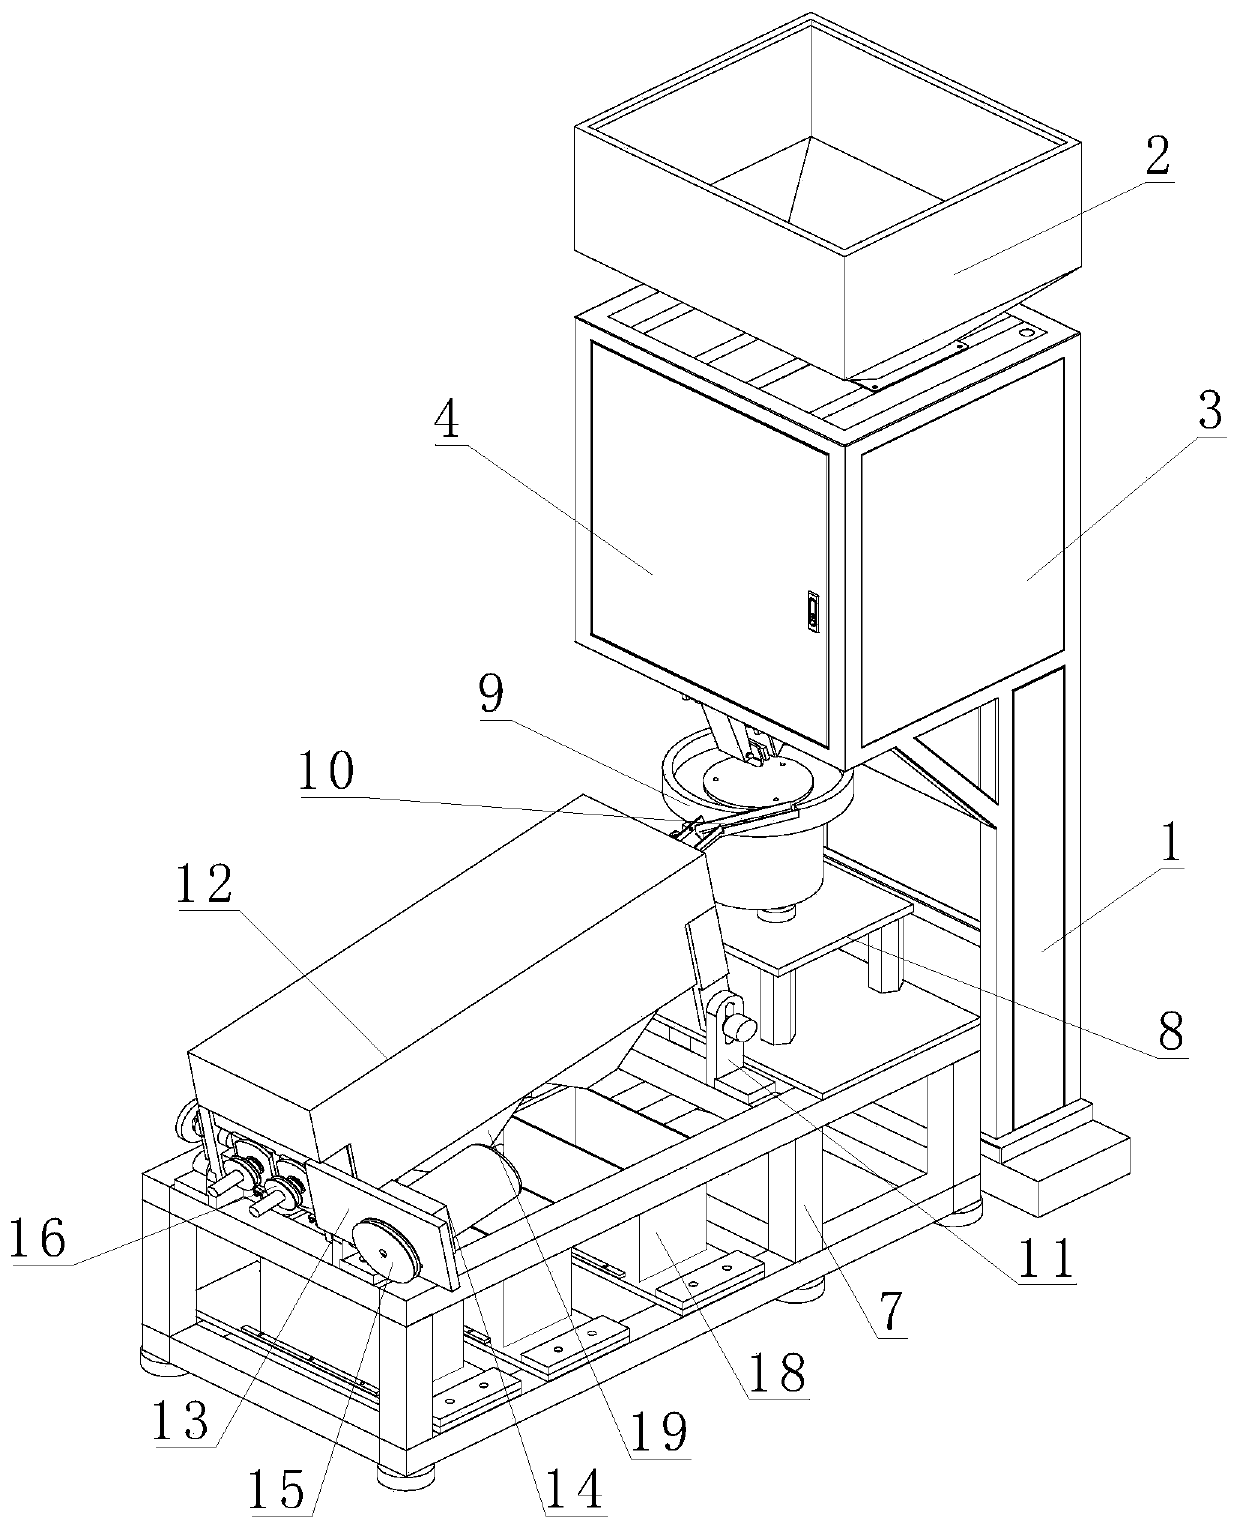 Multistage sorting device for tea leaf production